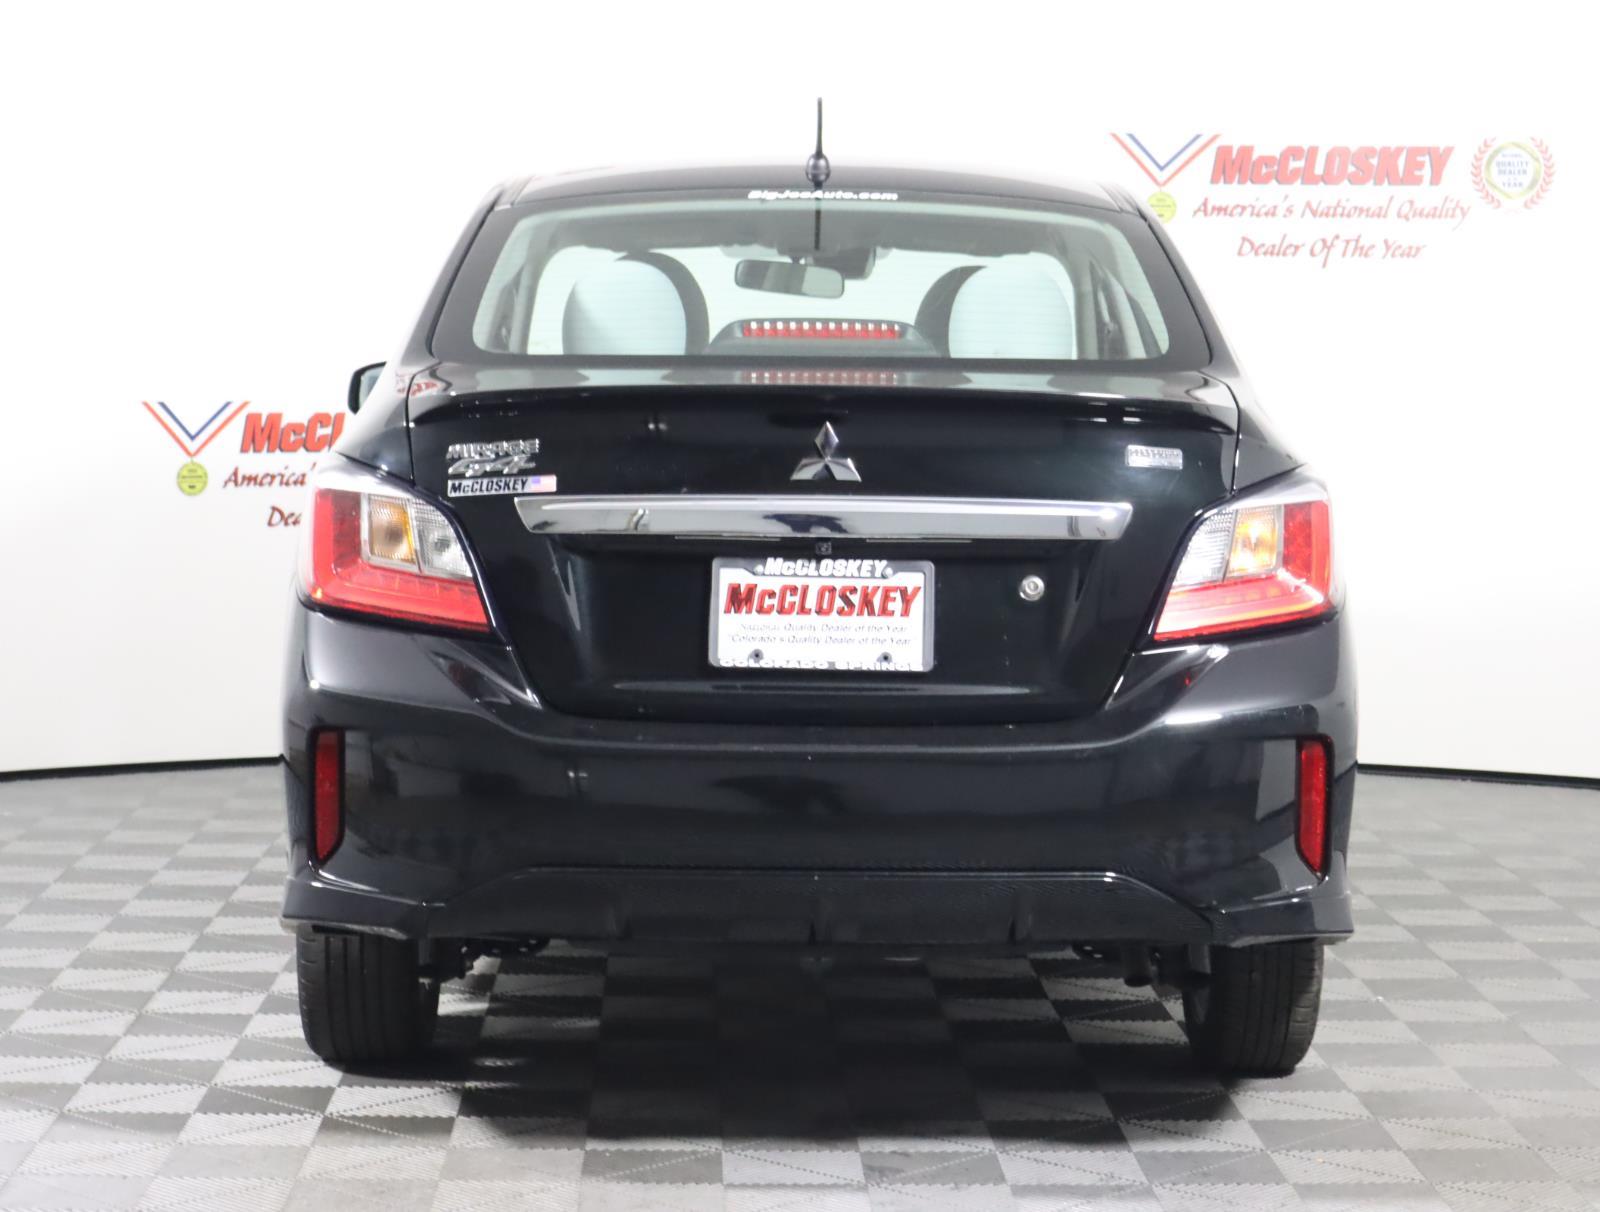 Preowned 2021 Mitsubishi Mirage G4 ES LOW MILES! EZ FINANCING! 41 MPG! for sale by McCloskey Imports & 4X4's in Colorado Springs, CO